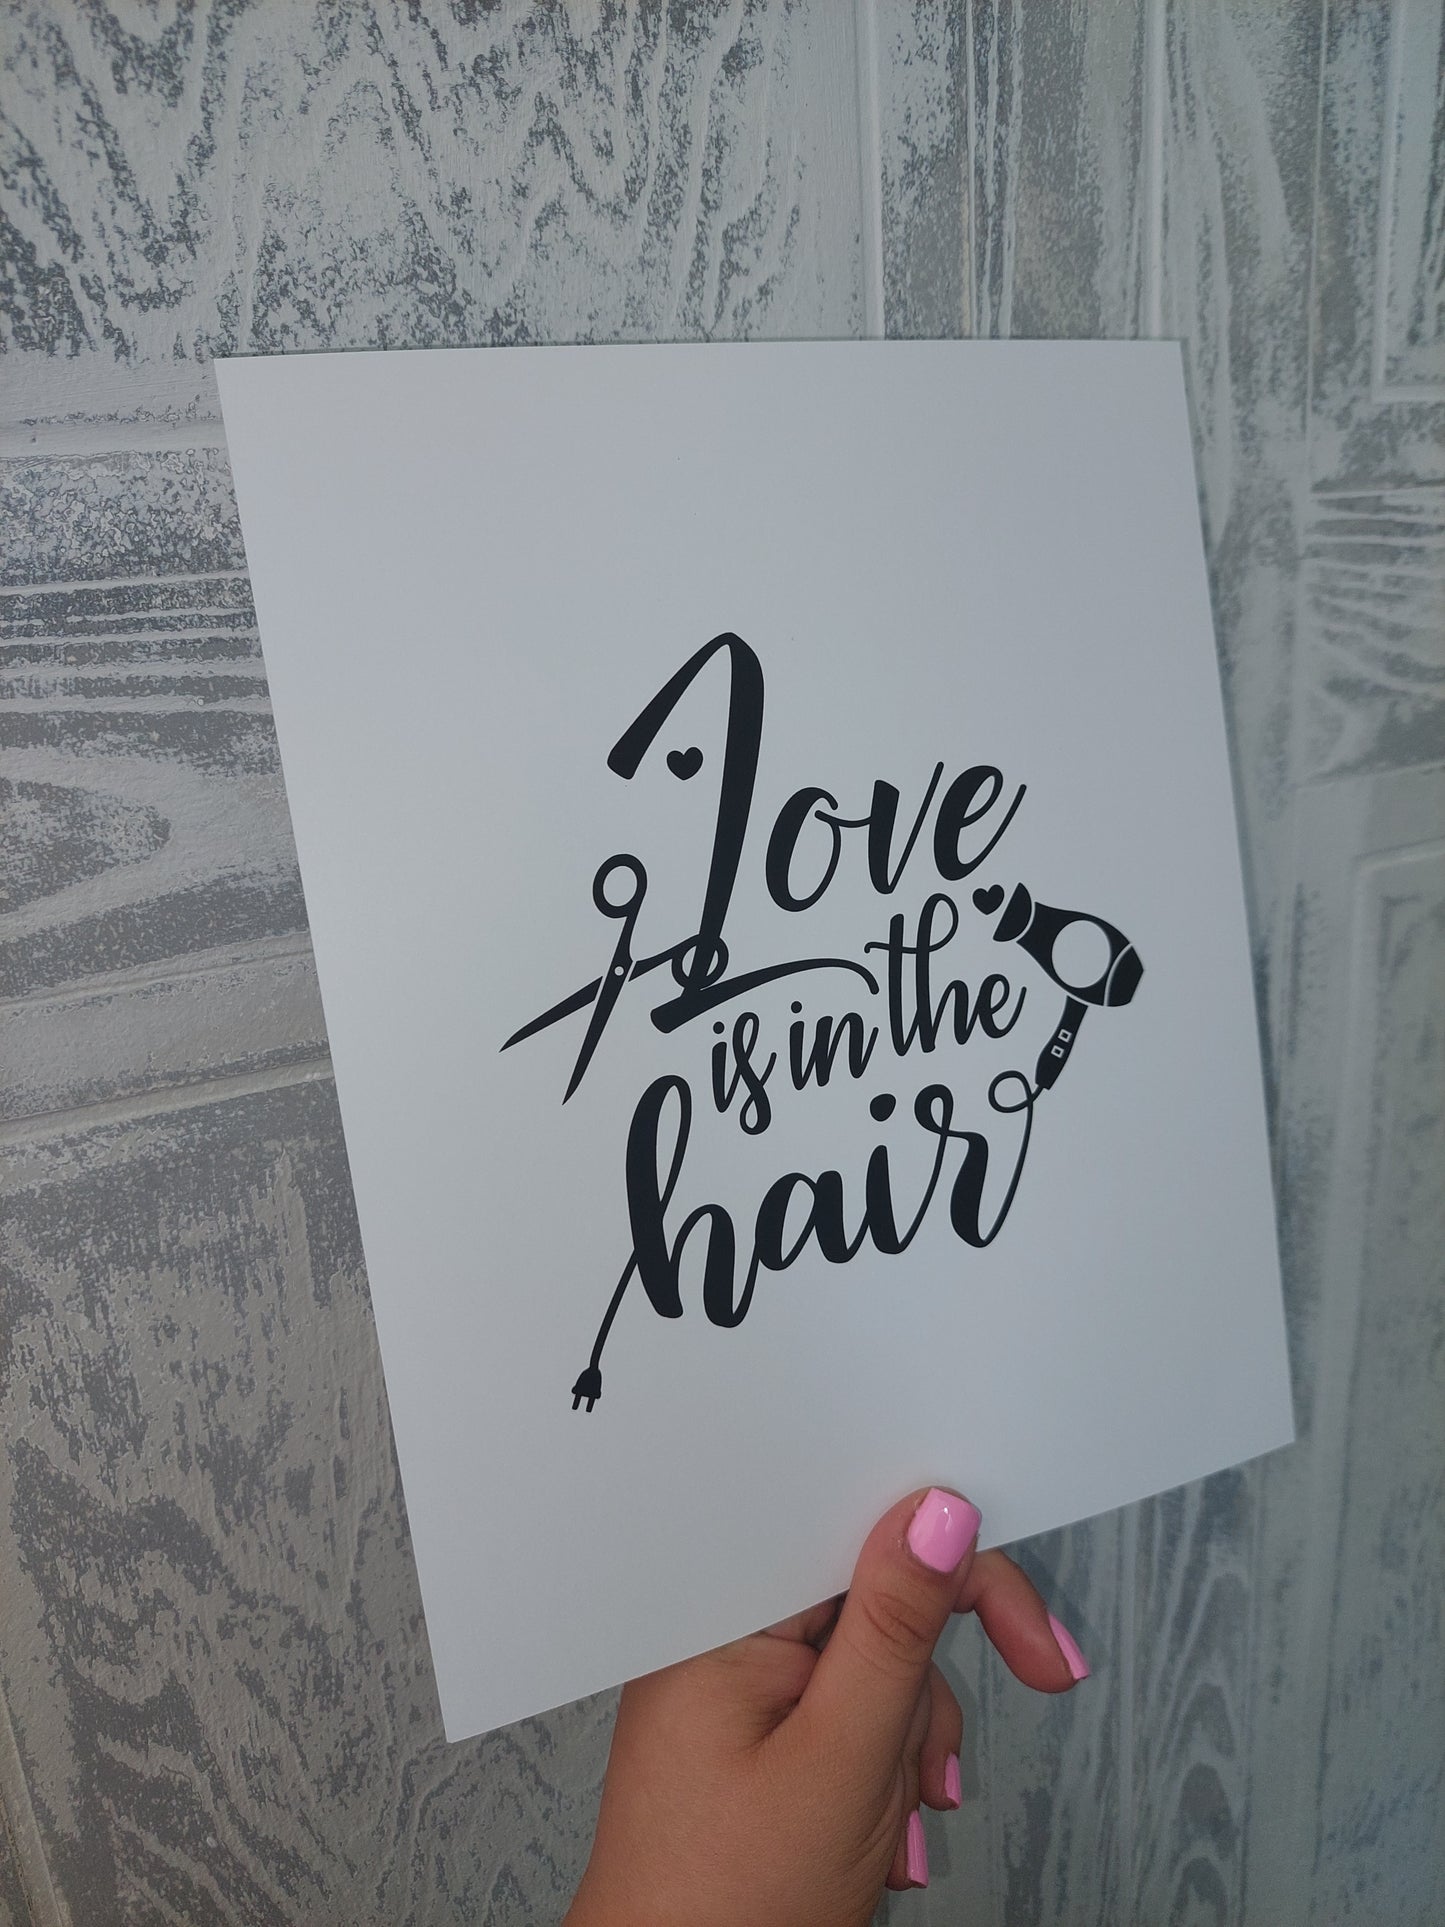 Salon Print | Love Is In The Hair | Hairdressing Print | Hair Quote